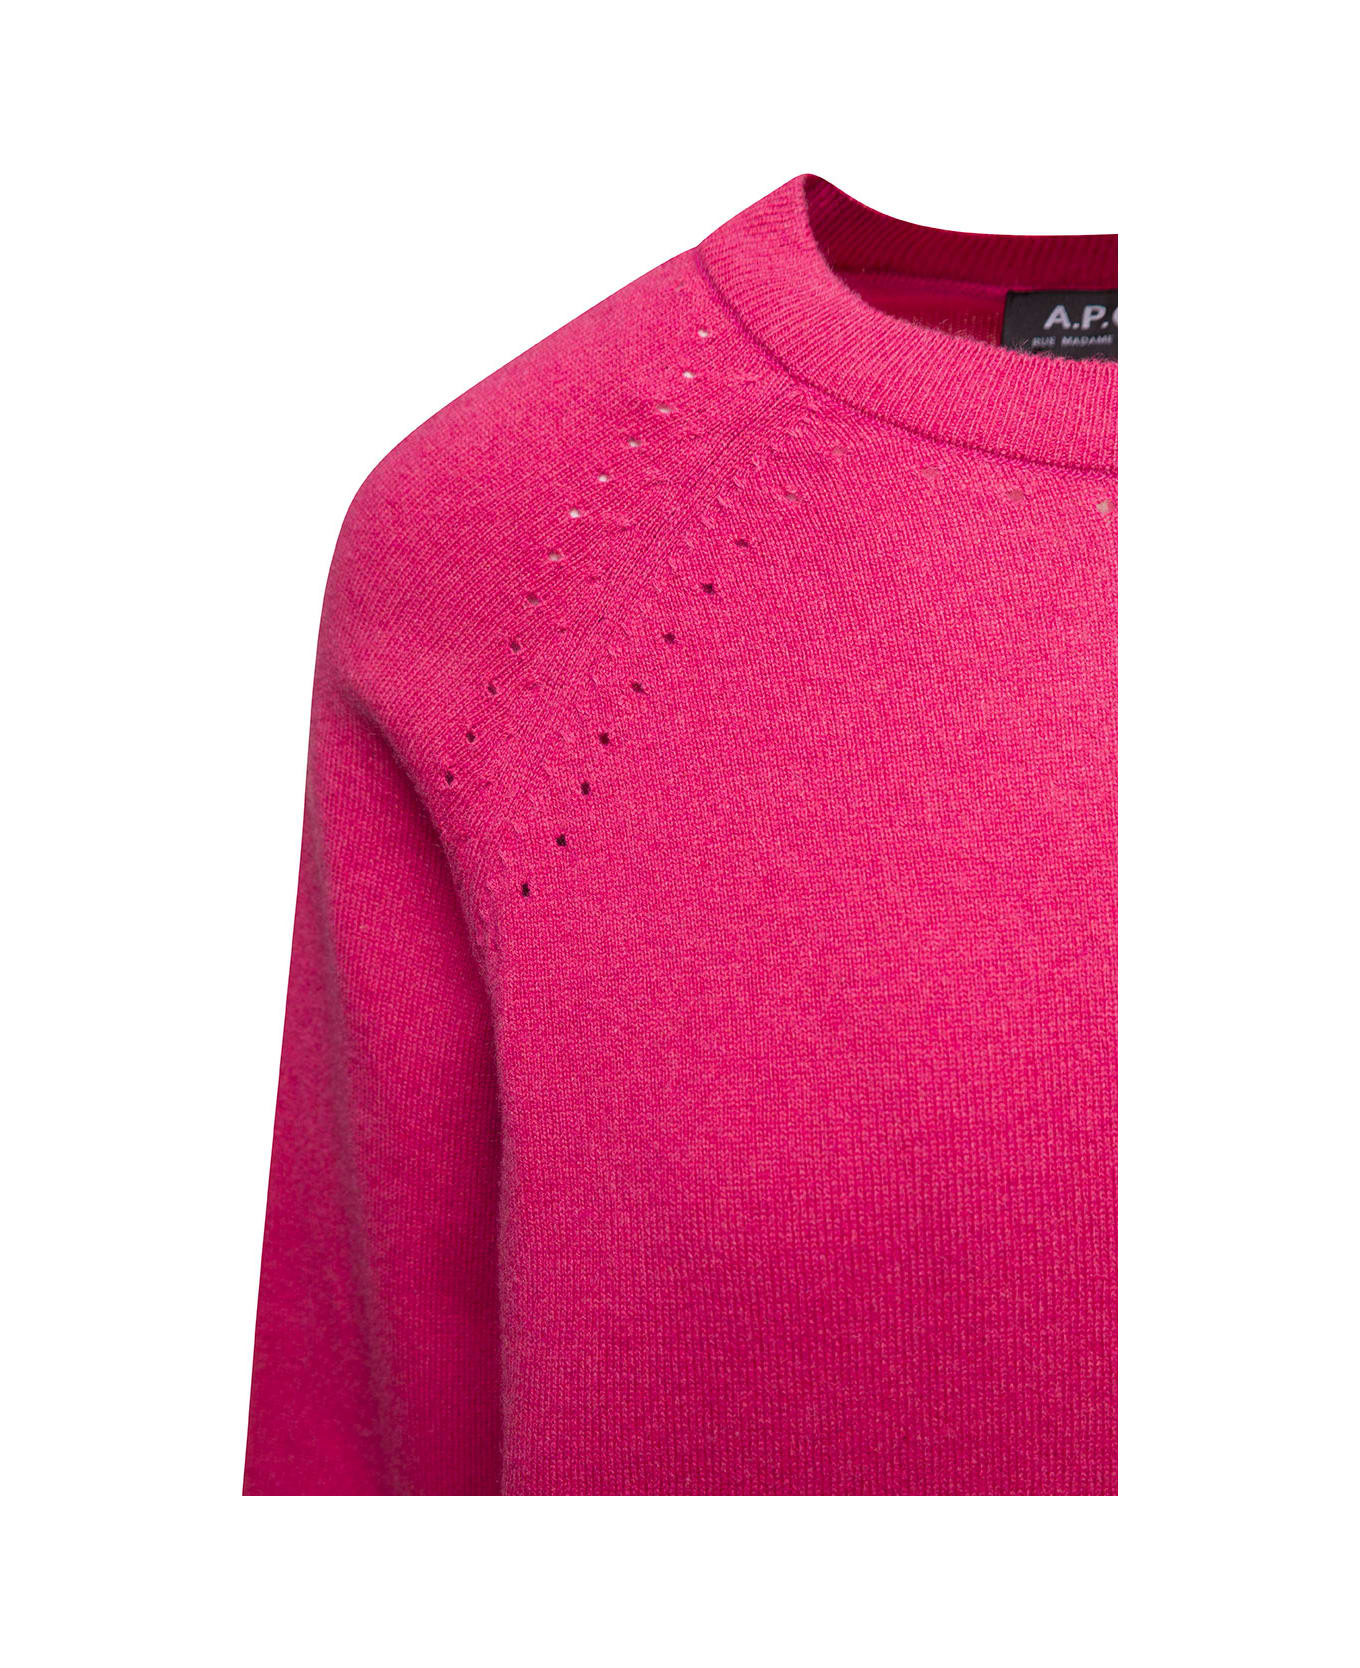 A.P.C. 'rosanna' Fuchsia Crewneck Sweater With Perforated Details In Cotton And Cashmere Woman - Fuxia フリース